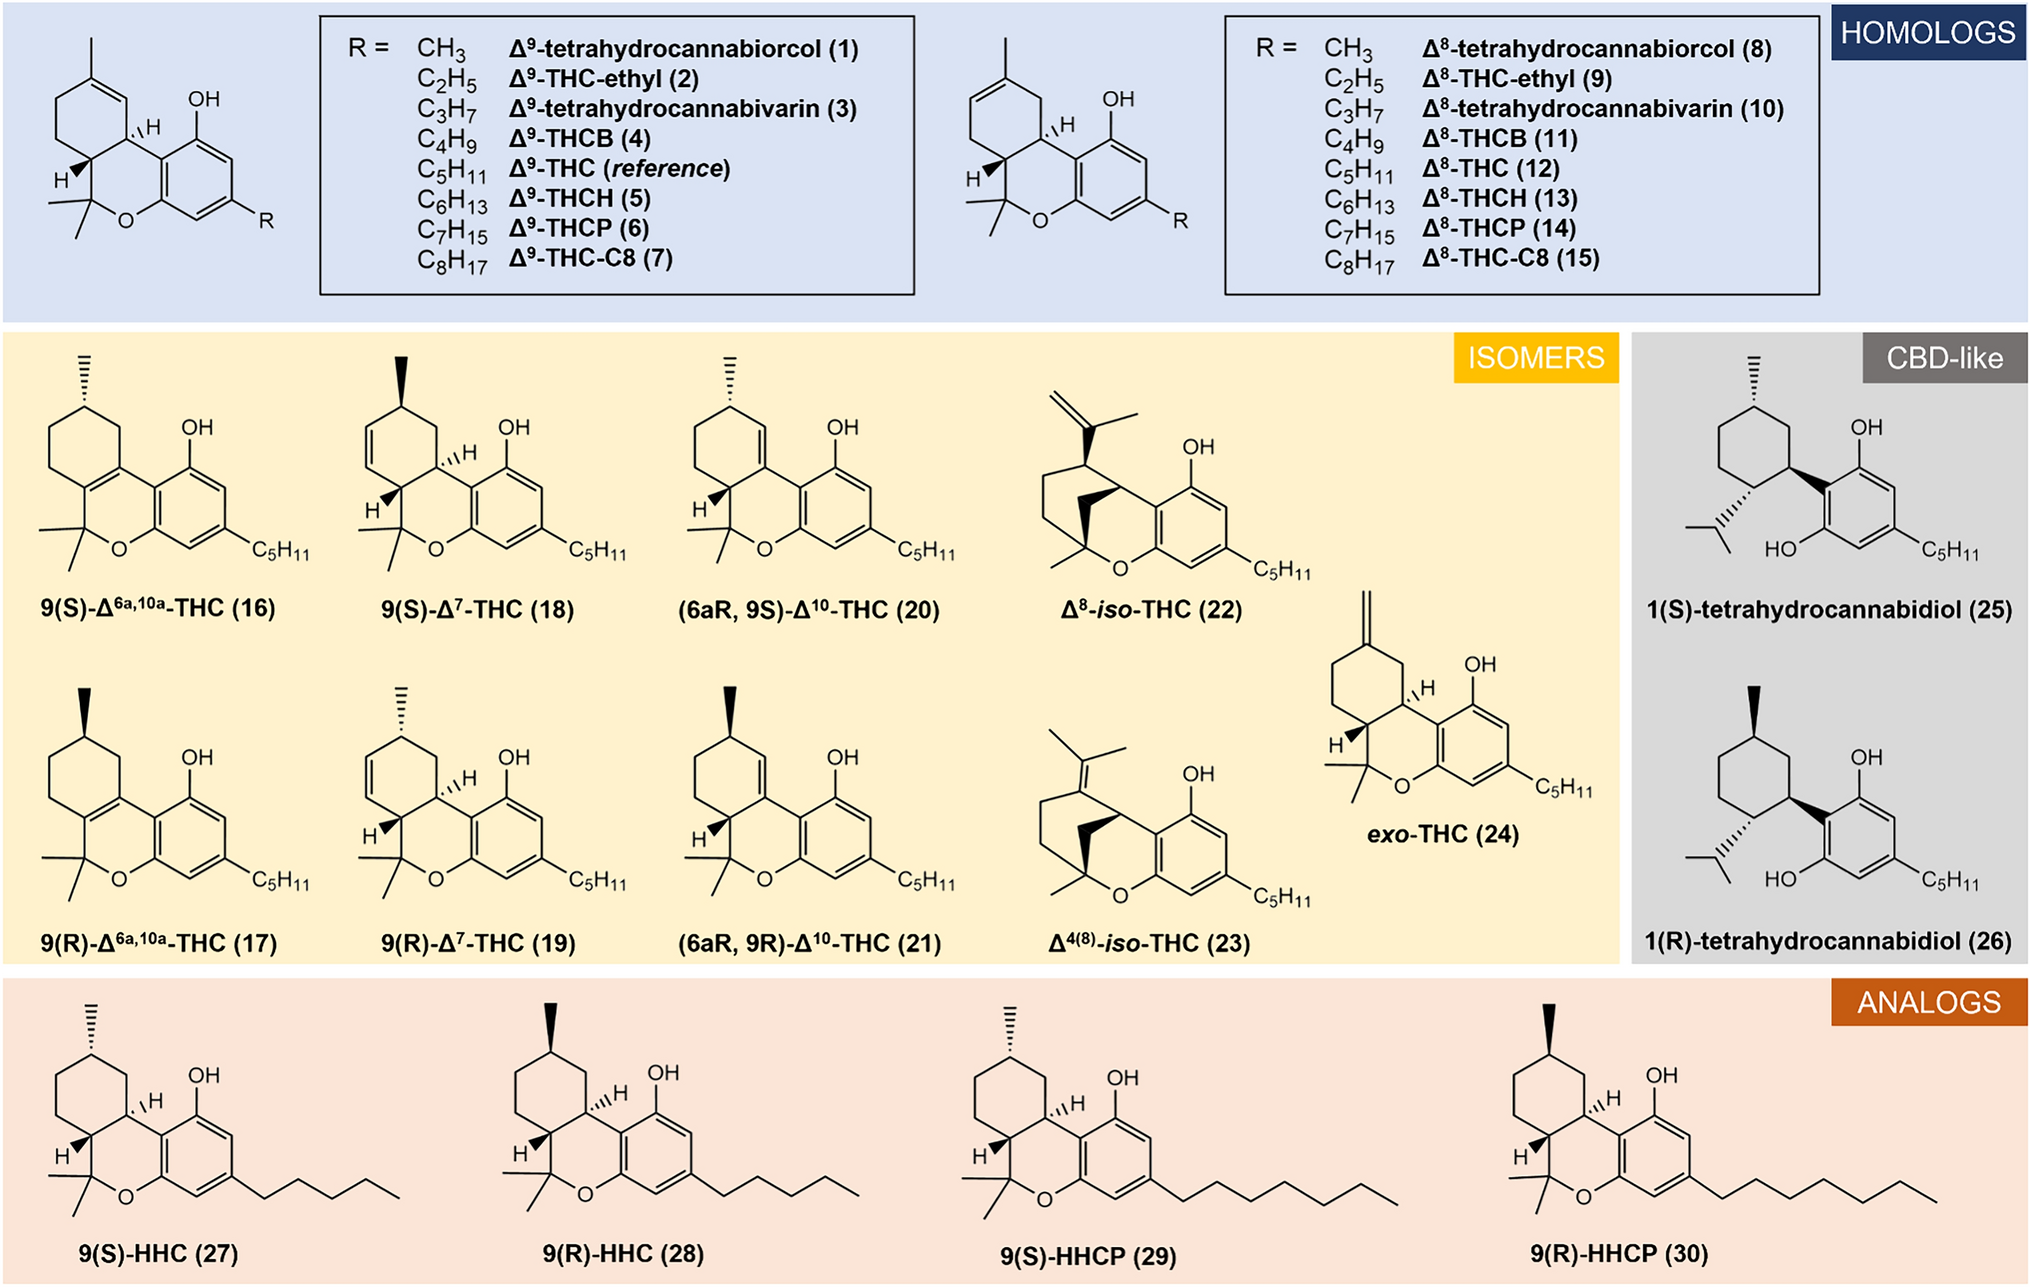 Investigation of the intrinsic cannabinoid activity of hemp-derived and semisynthetic cannabinoids with β-arrestin2 recruitment assays—and how this matters for the harm potential of seized drugs